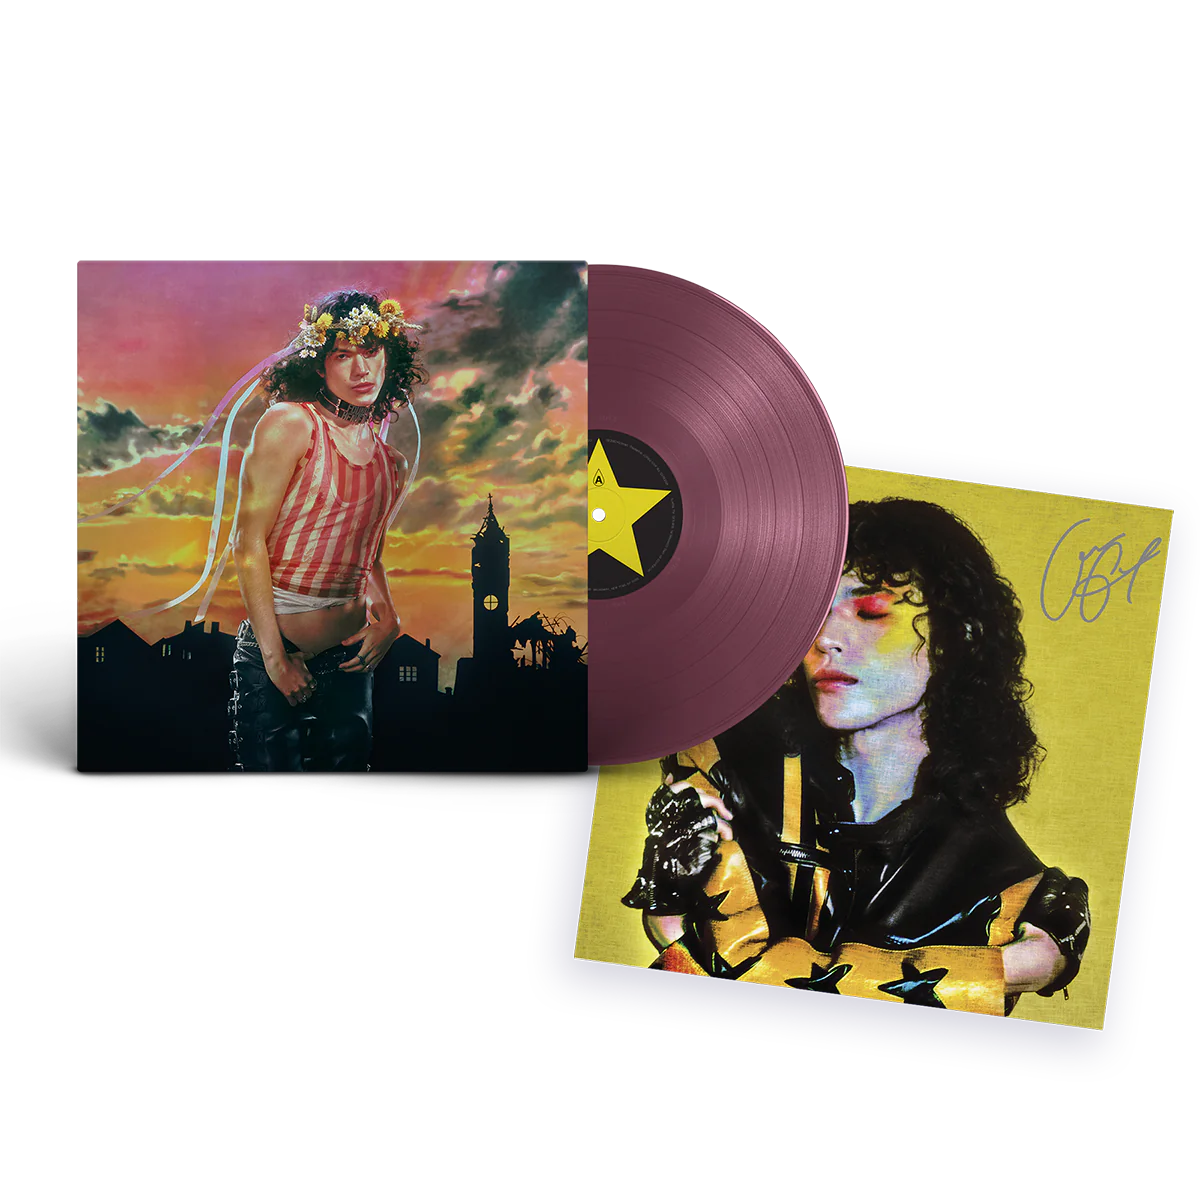 Found Heaven: 'Alley Rose' Edition Vinyl LP + Signed Art Card